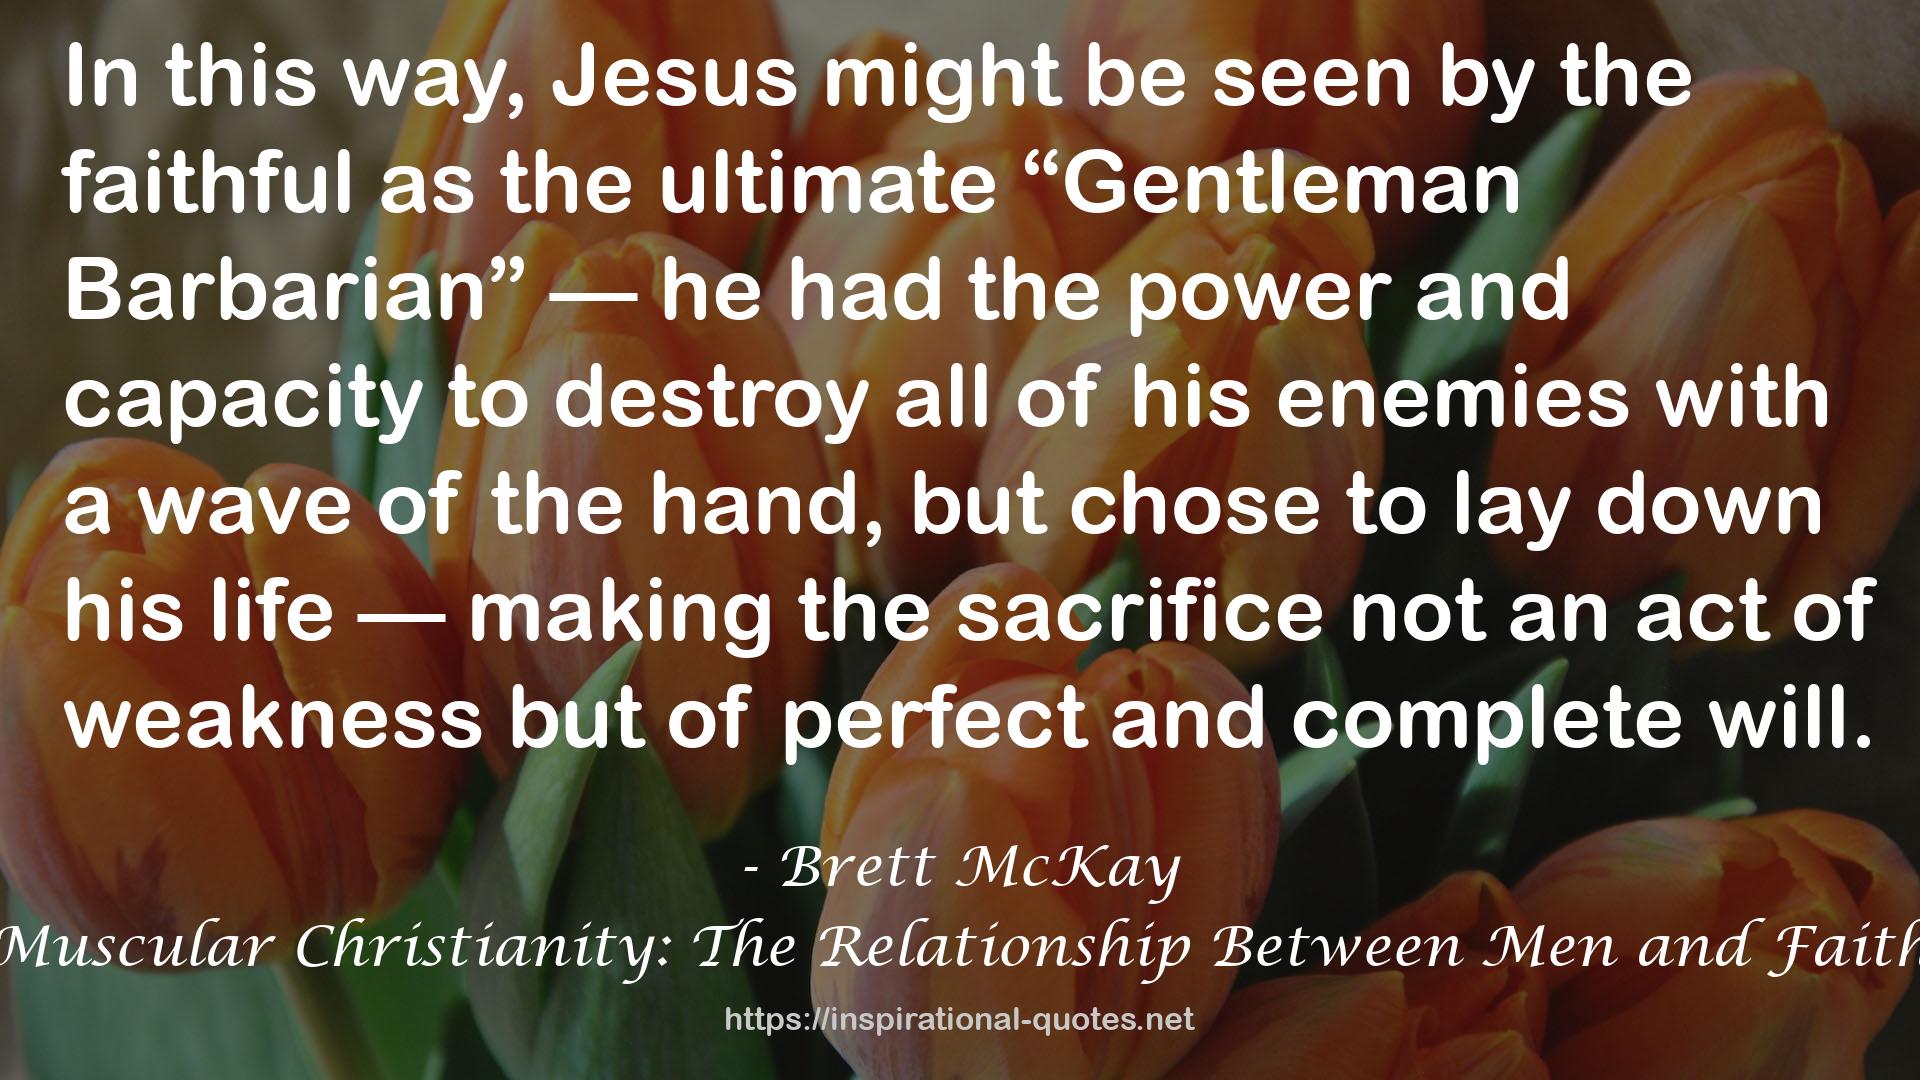 Muscular Christianity: The Relationship Between Men and Faith QUOTES